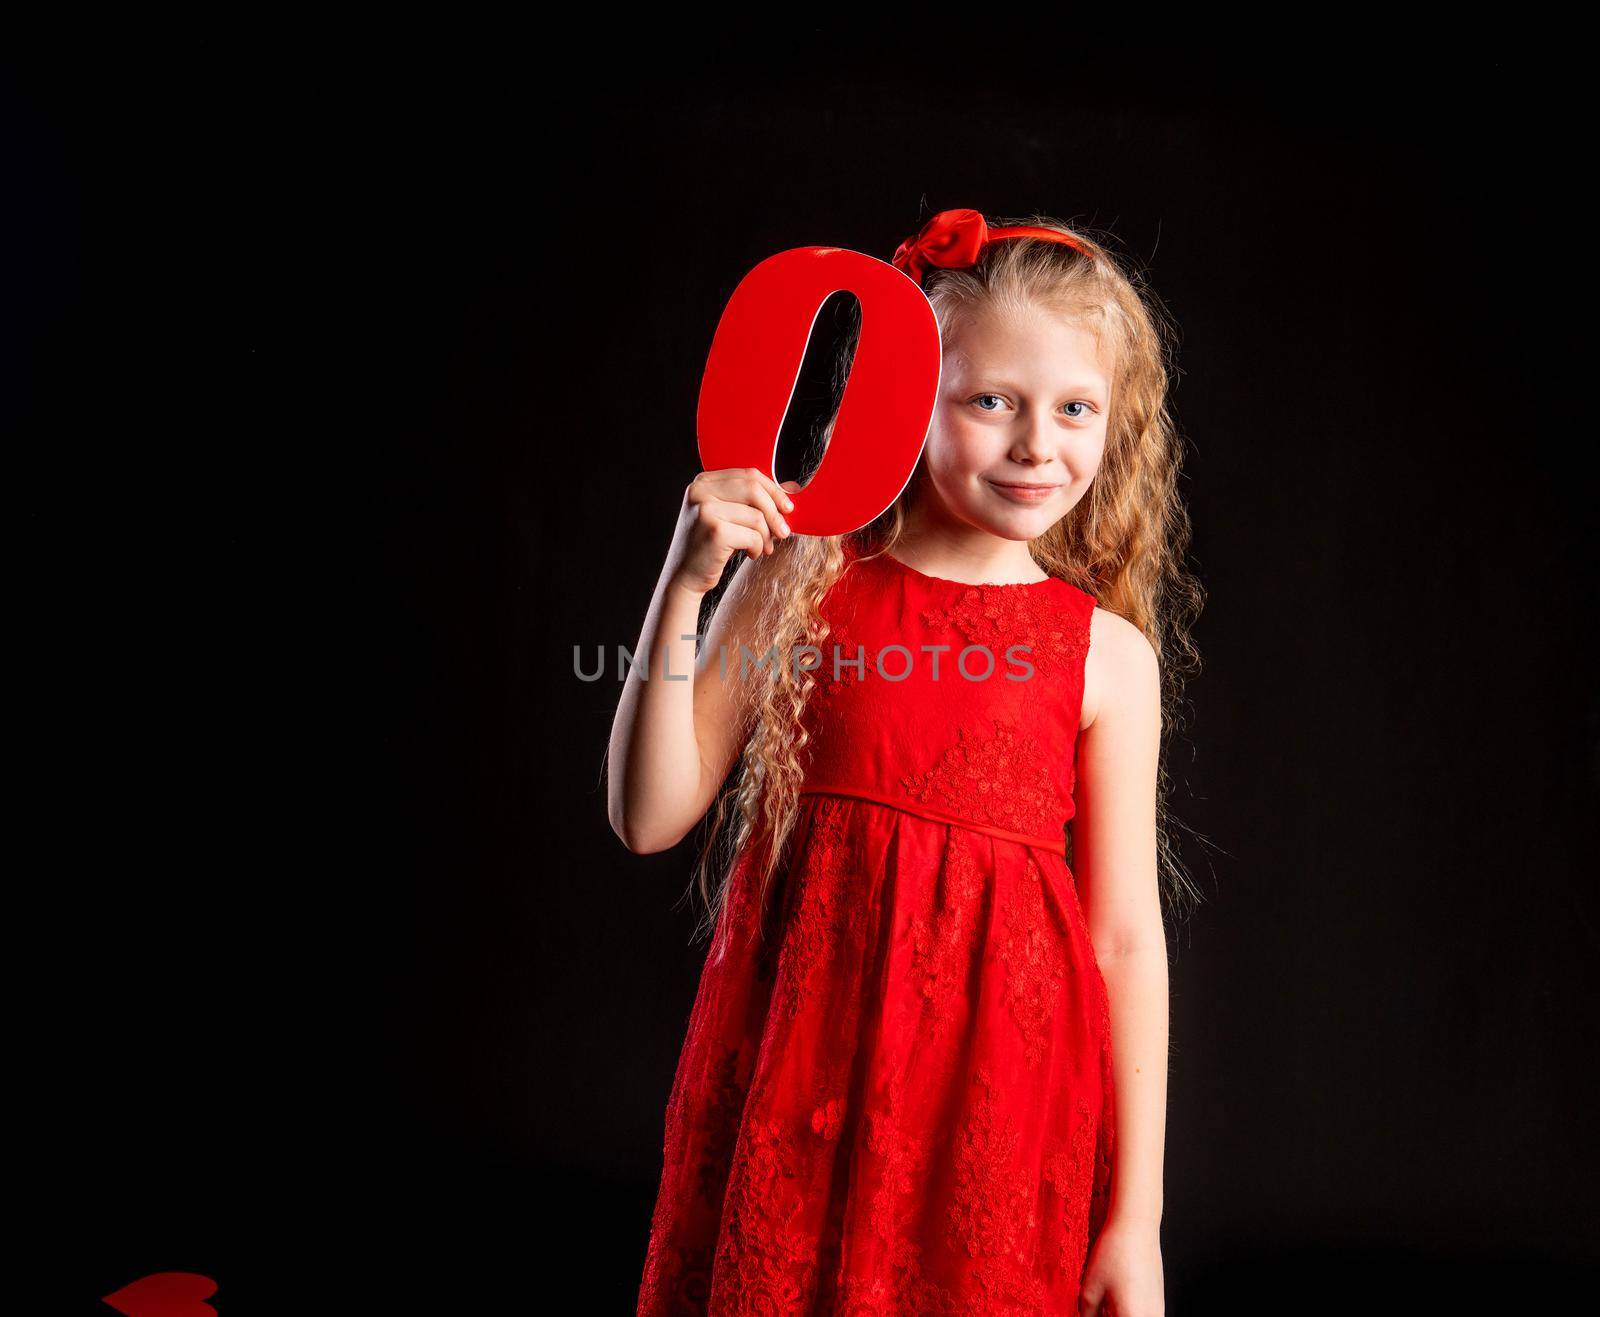 O holds a child holding in his hand the letter LOVE Valentine symbol, board, on the floor hearts of romance space. formula art. emotion feeling, gift in red girl dress, barefoot